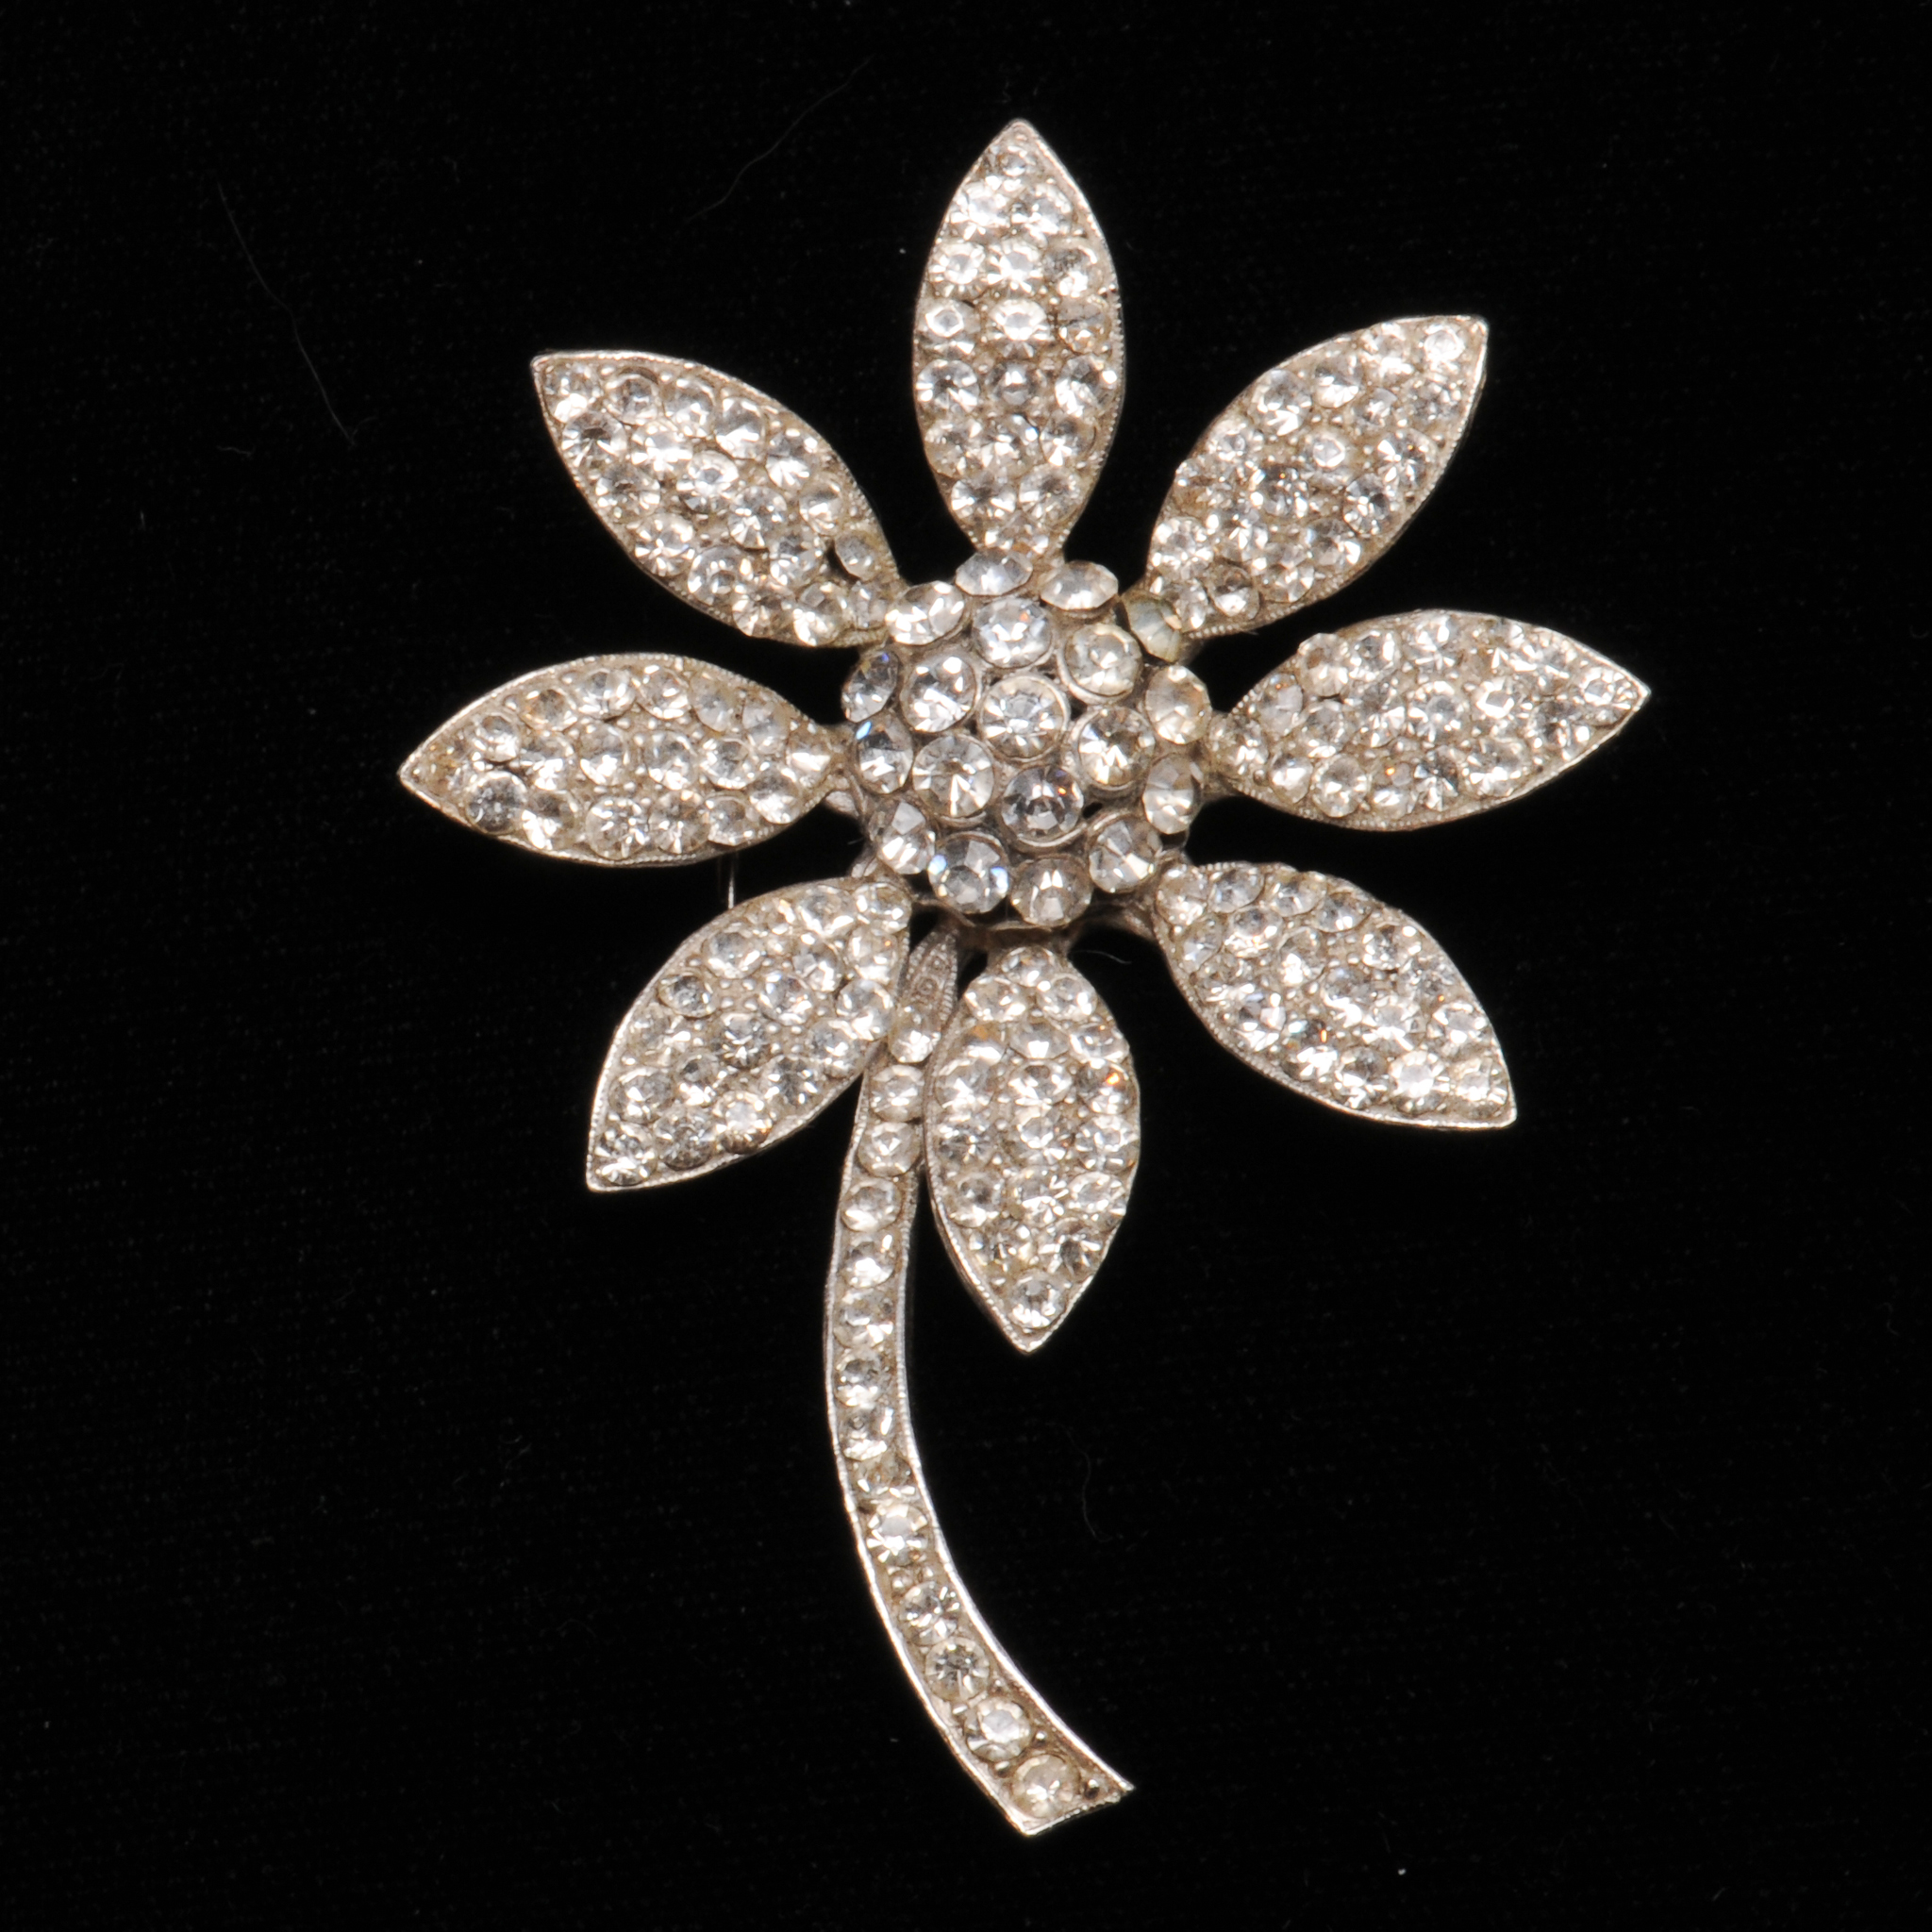 Weiss+Dazzling+Rhinestone+Daisy+Pin+Brooch picture 1